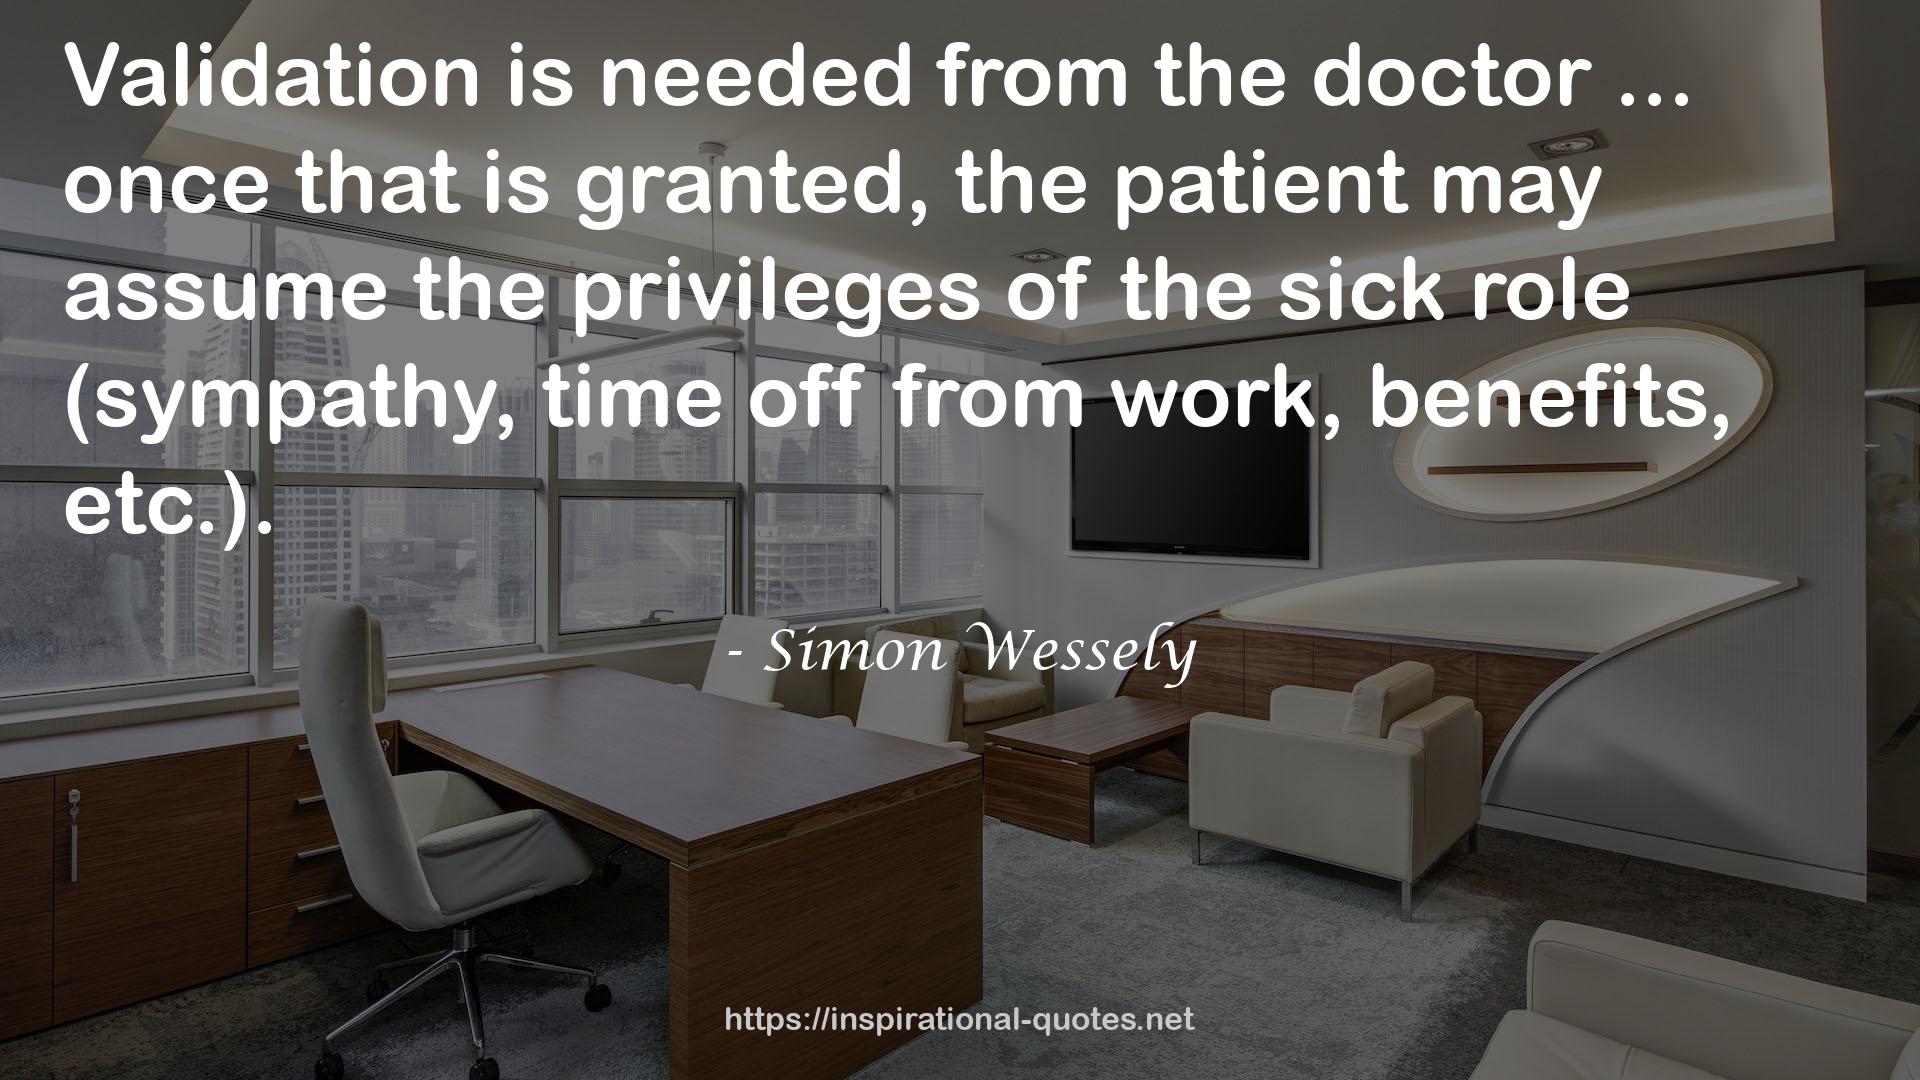 Simon Wessely QUOTES